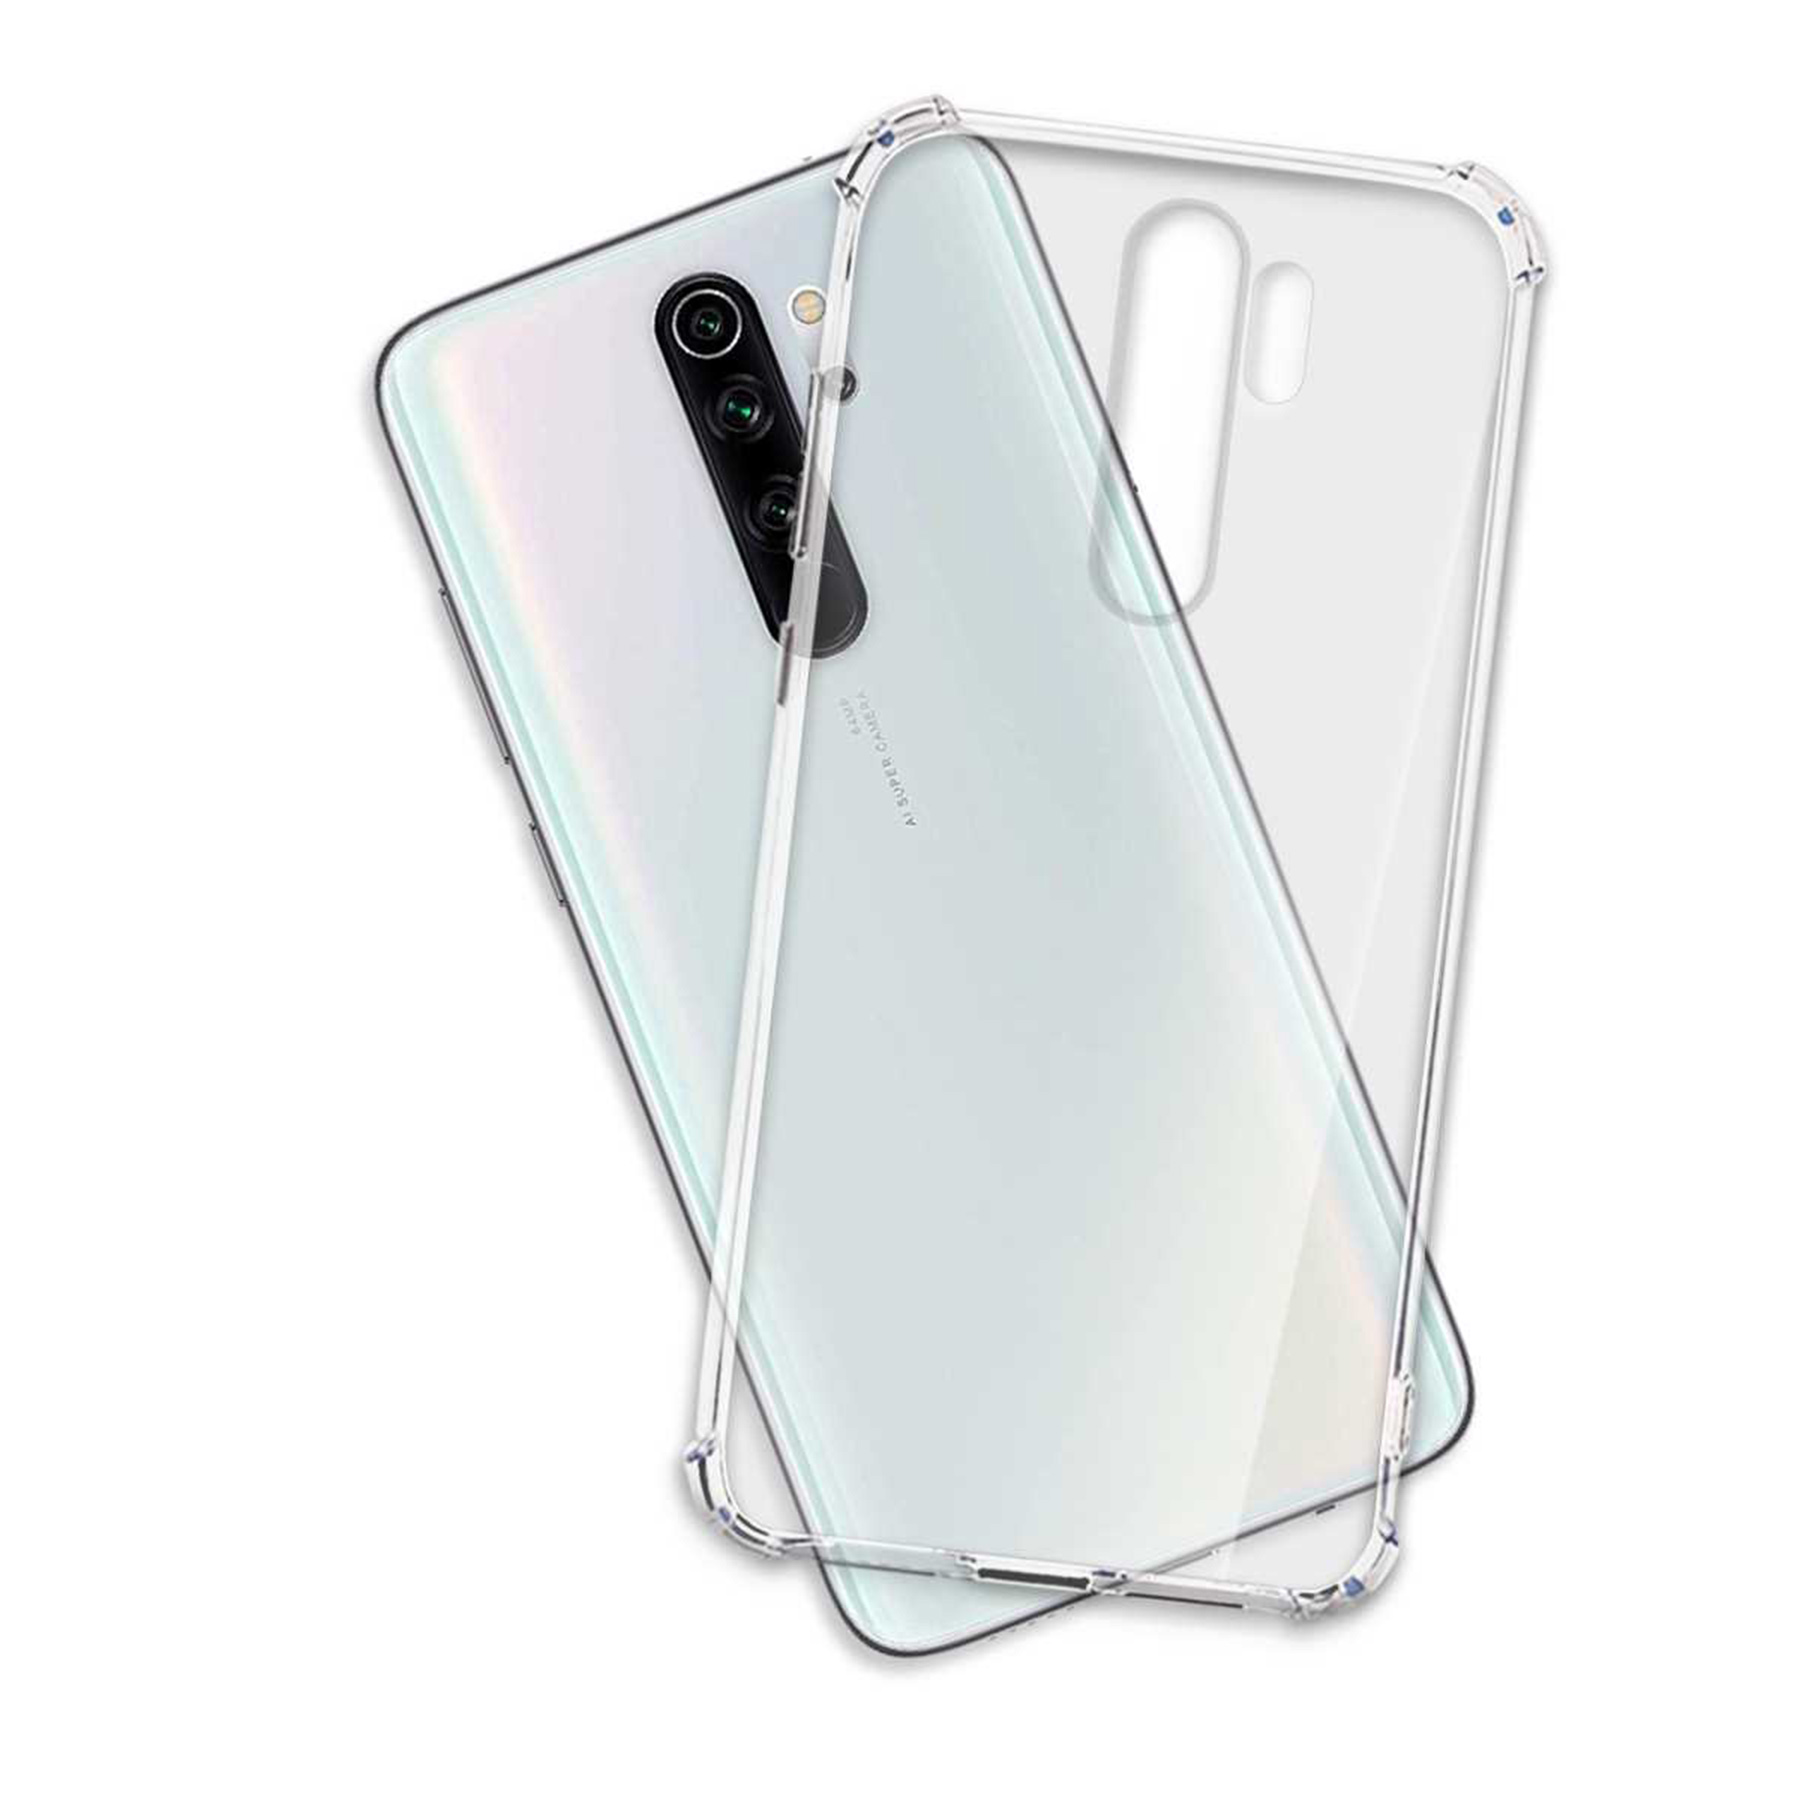 8 Case, MTB Redmi Backcover, Note MORE Pro, ENERGY Armor Clear Transparent Xiaomi,